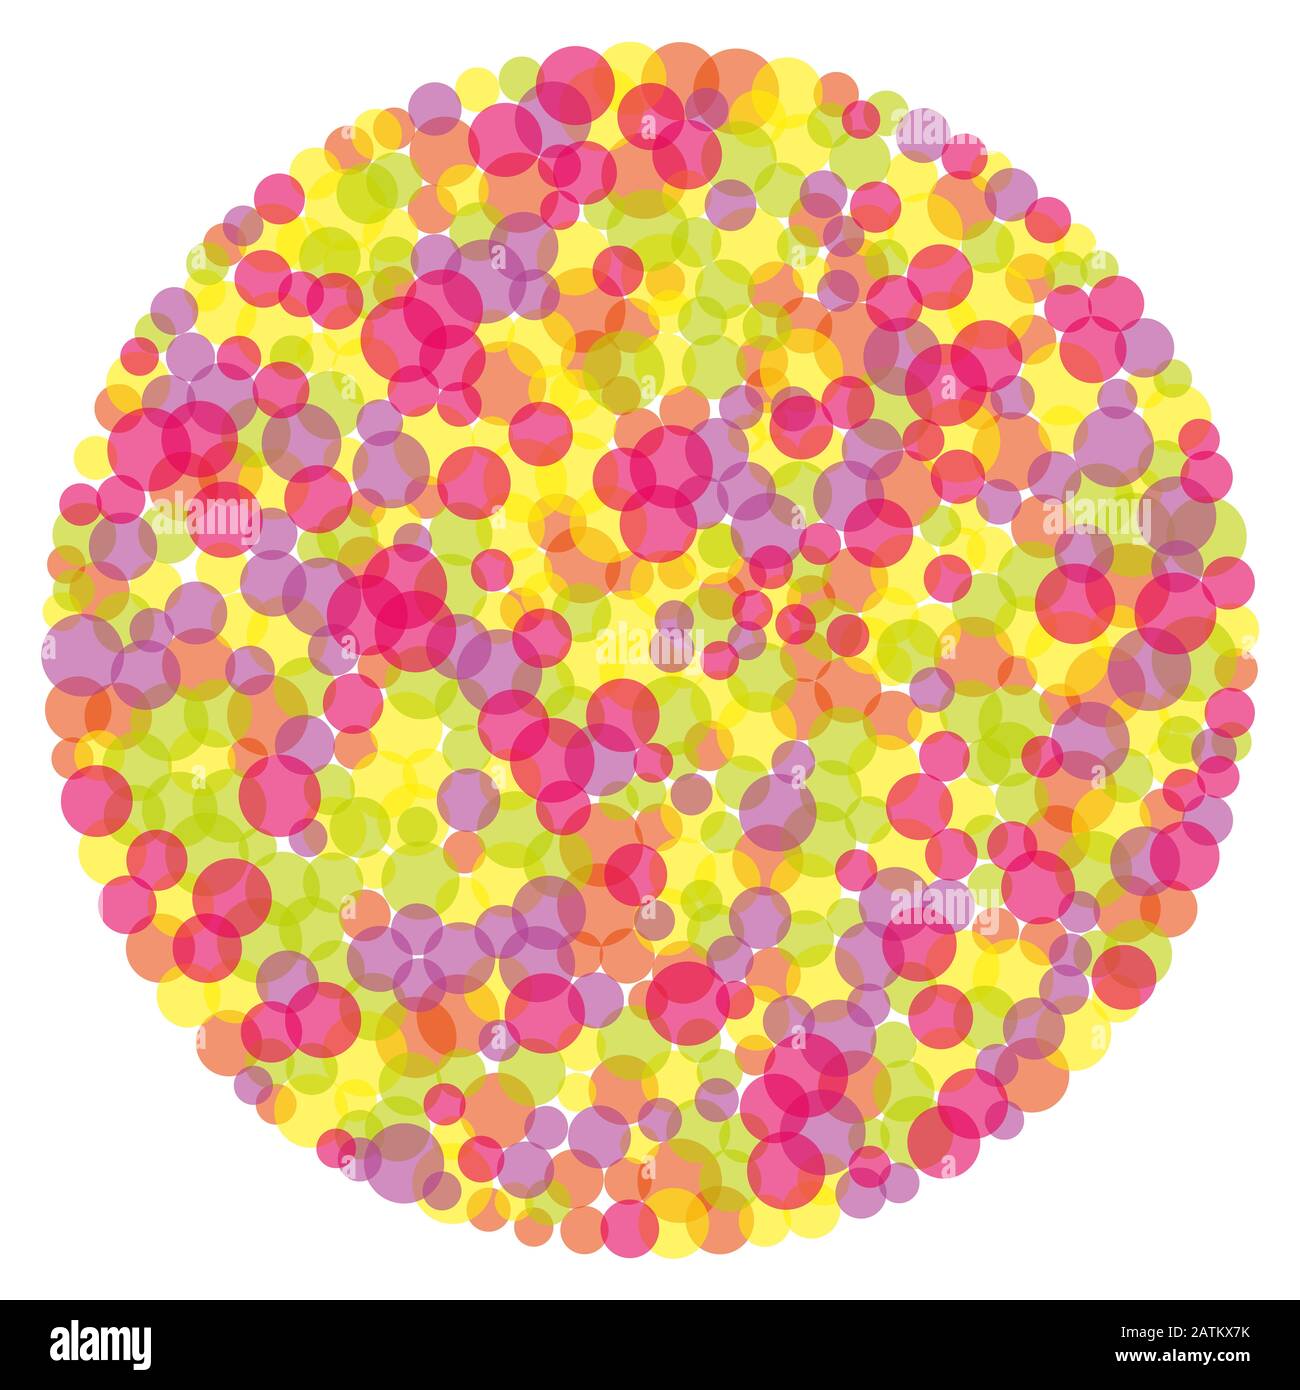 Circle shape filled with colorful circles. Randomly placed and overlapping dots of red, yellow, green, purple and pink color. Stock Photo